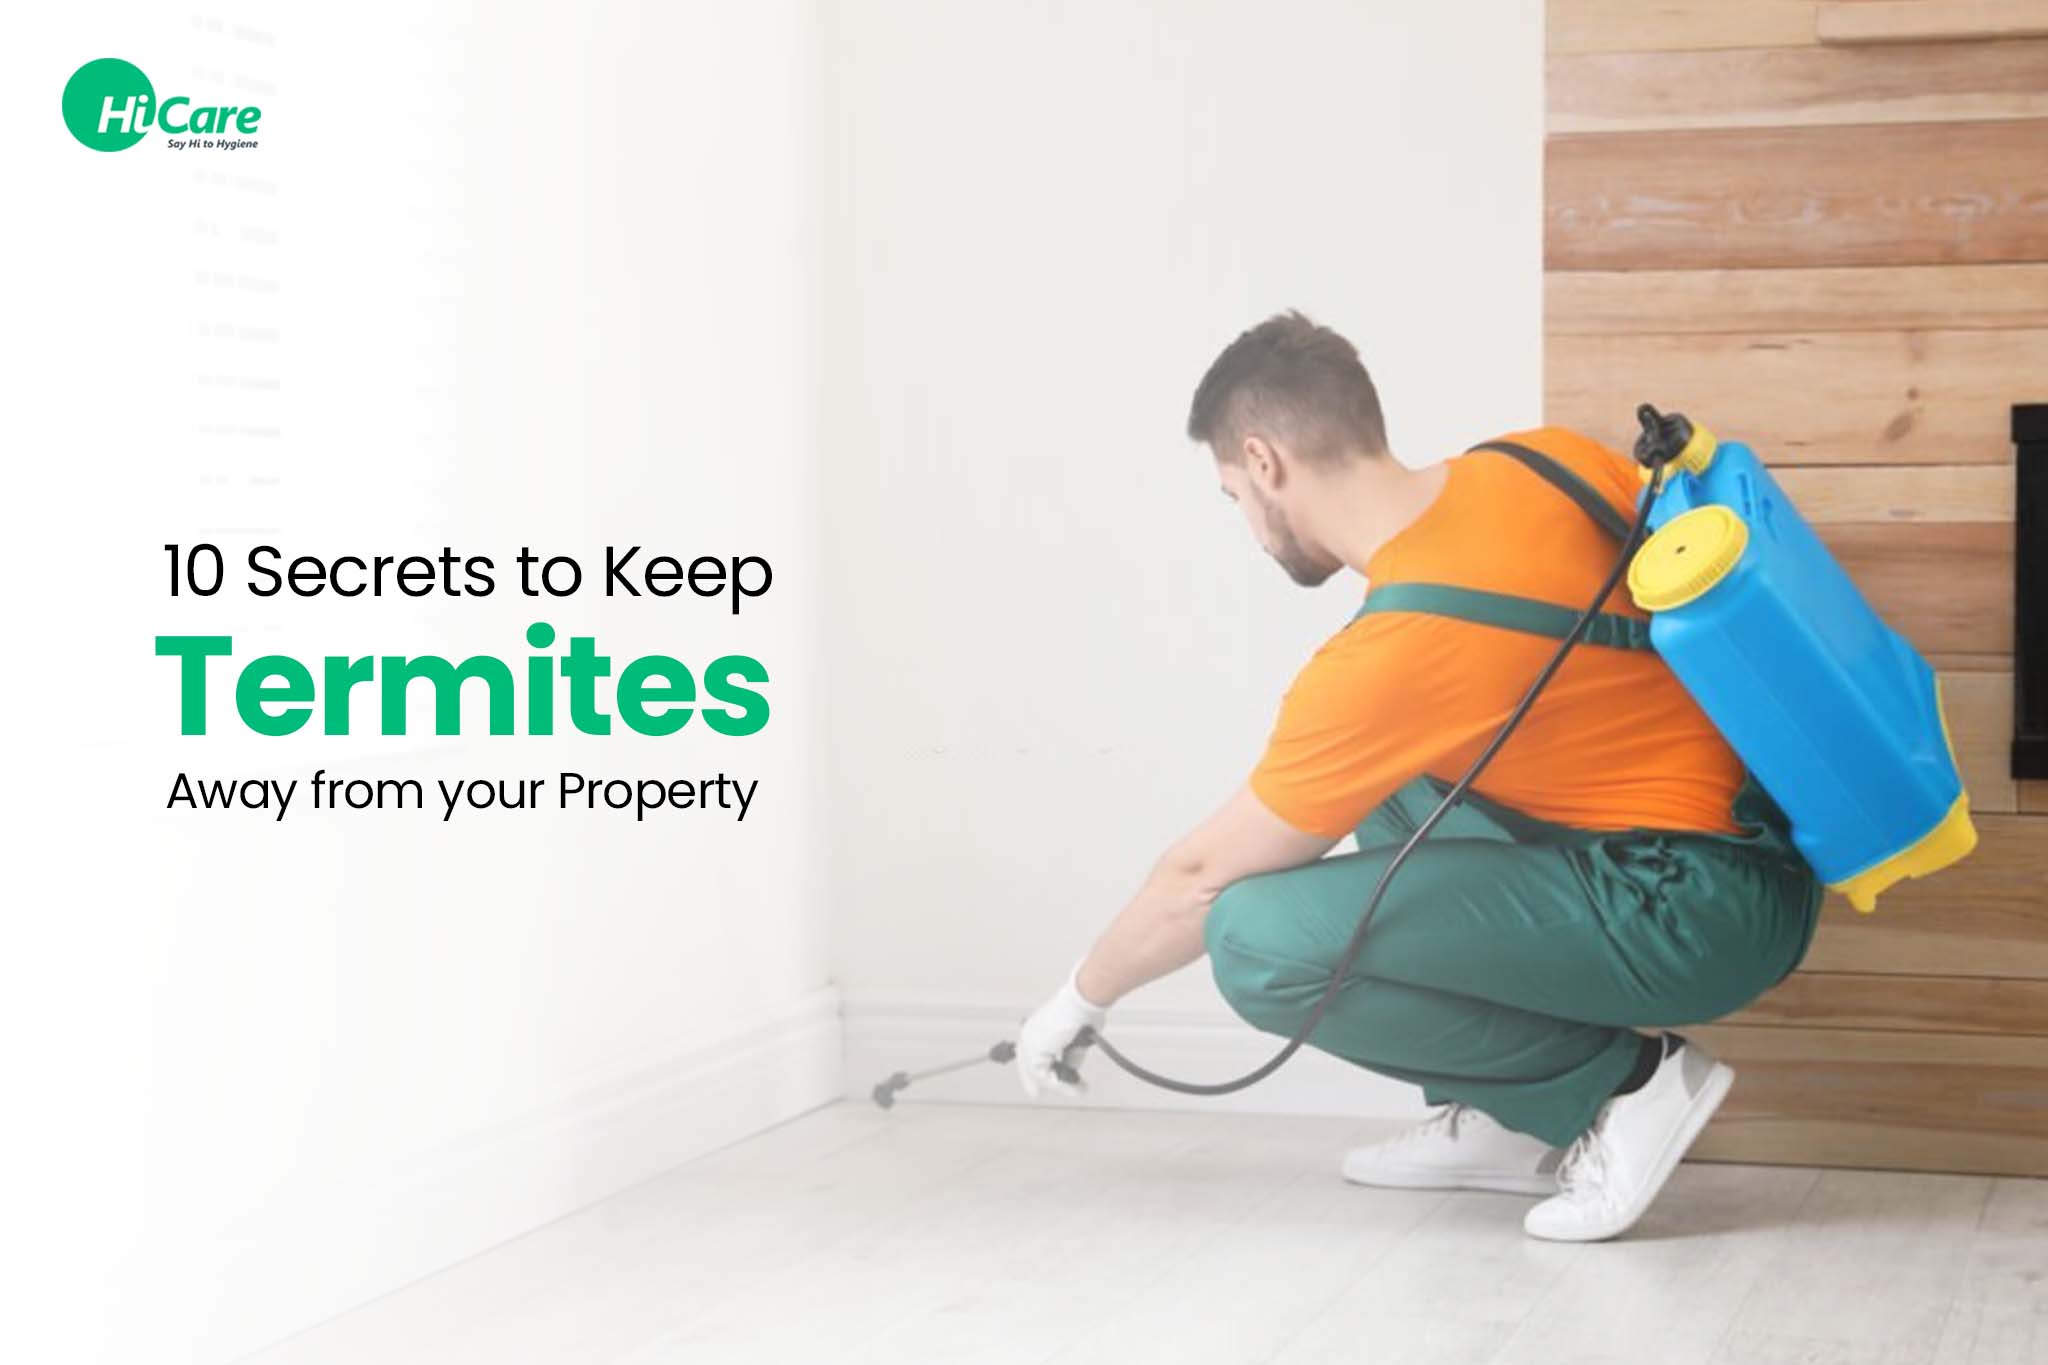 10 Secrets to Keep Termites Away from Your Property